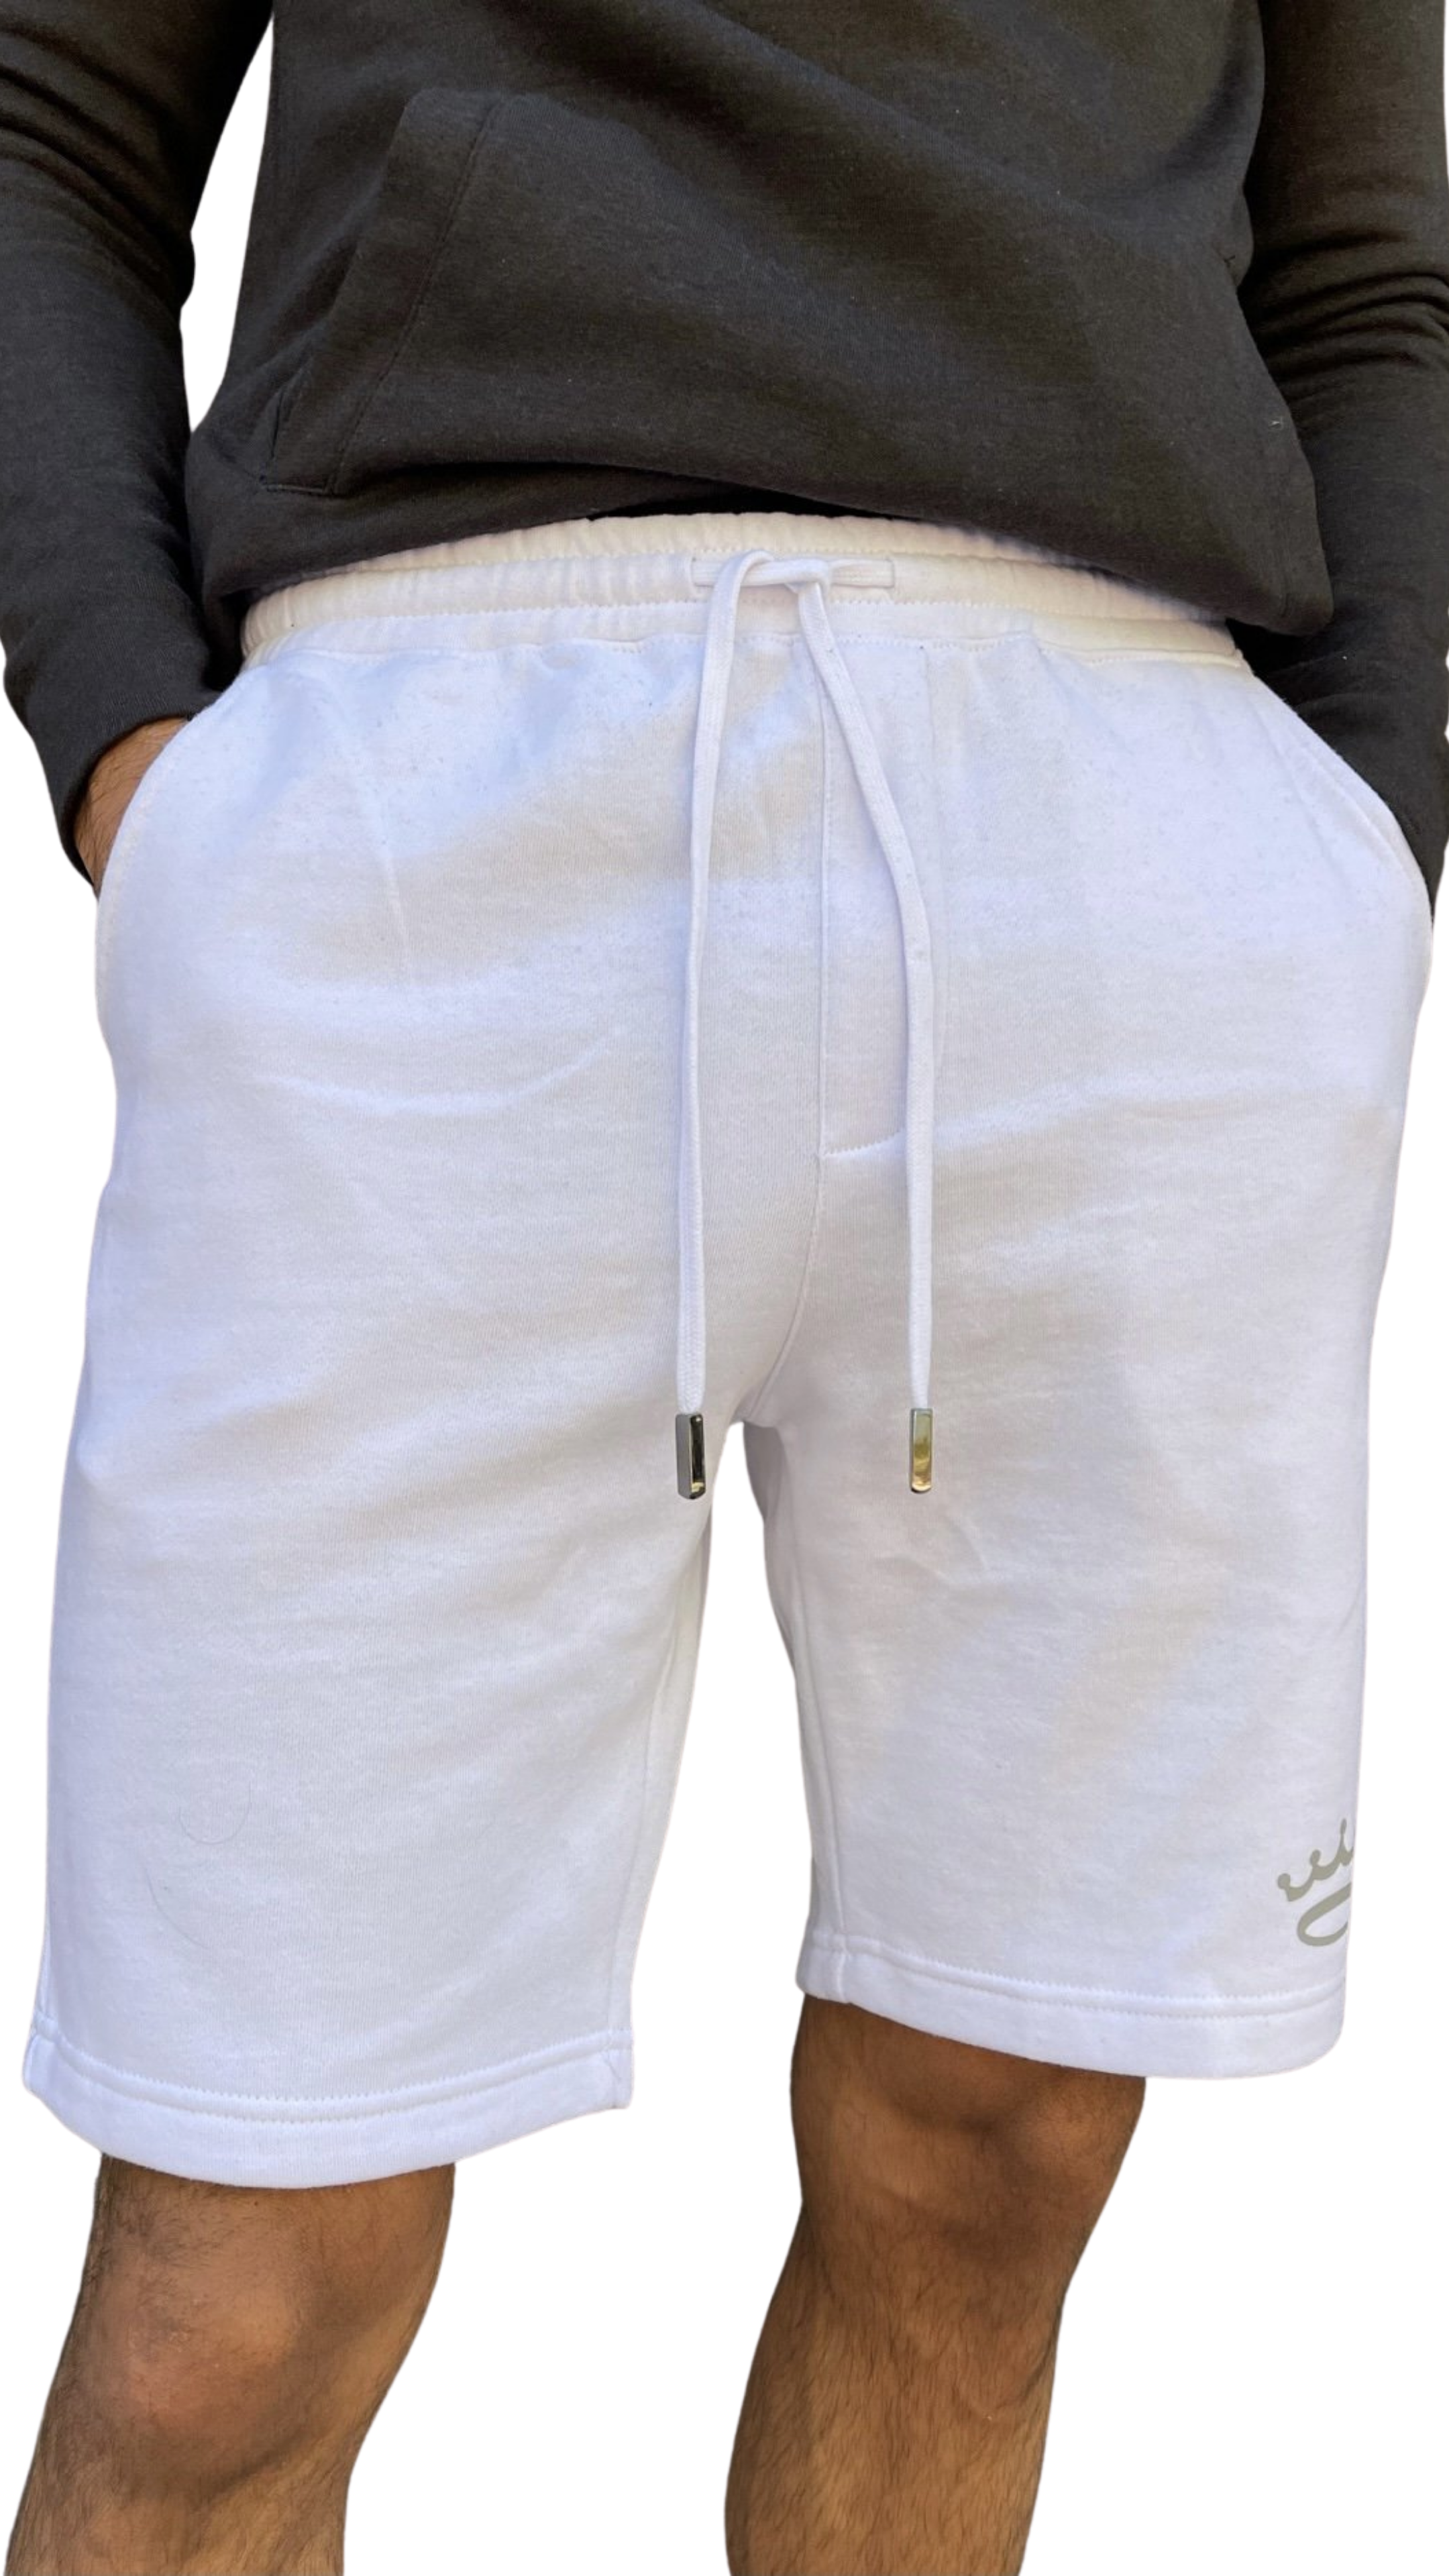 Sweat Shorts - White / Grey - Crowned Brand ™